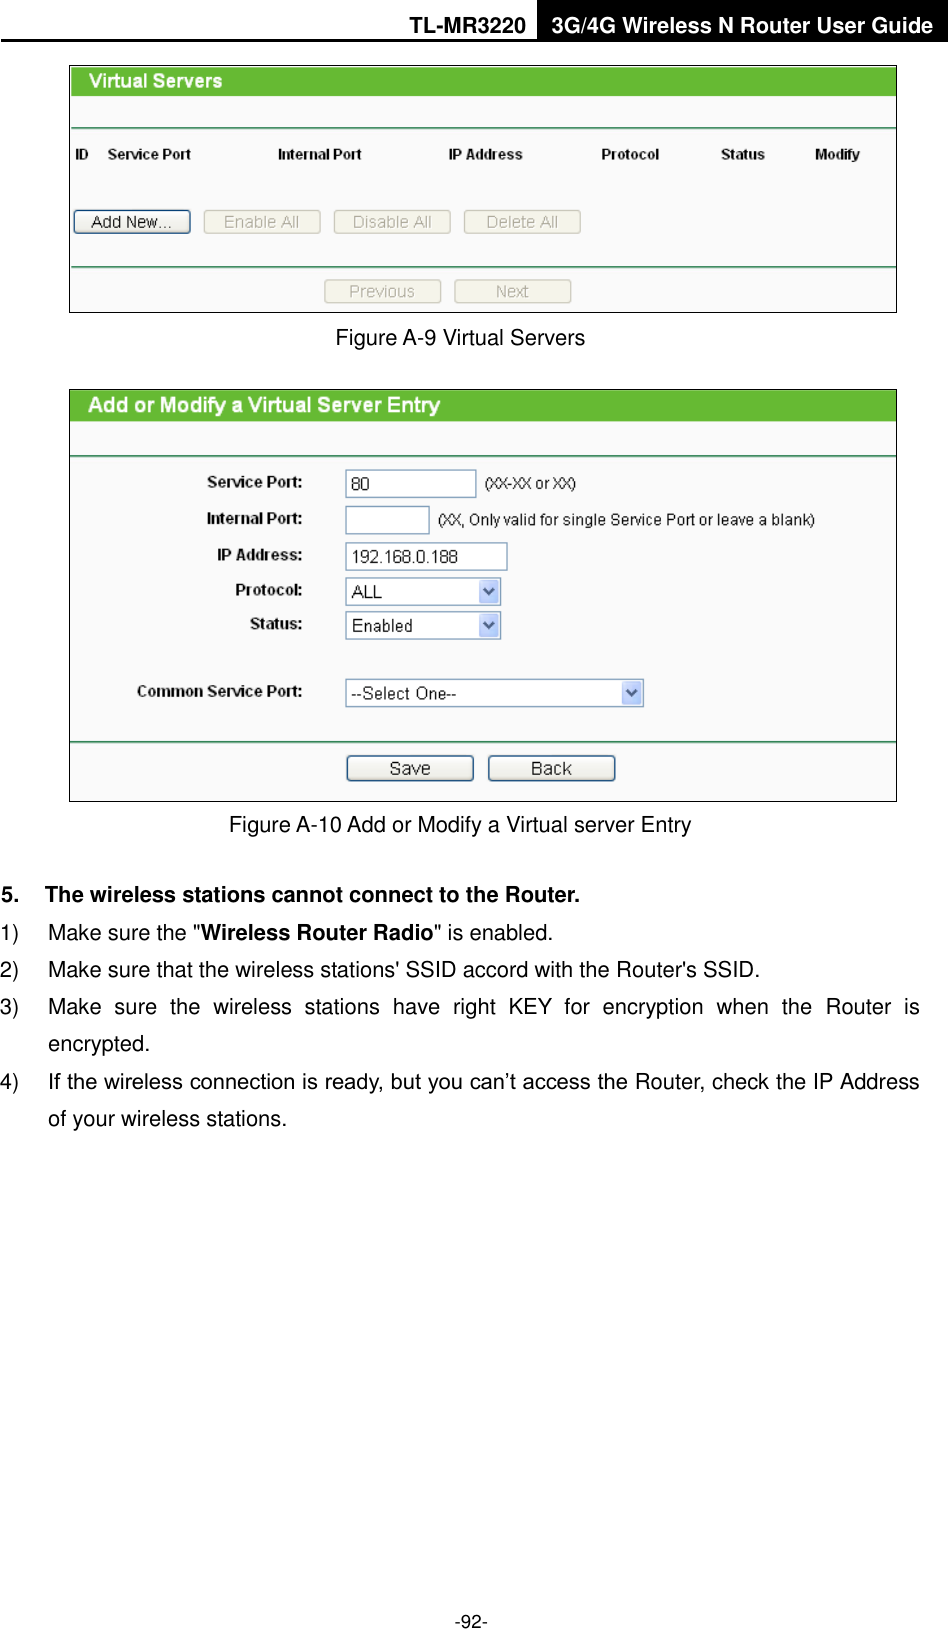 TL-MR3220 3G/4G Wireless N Router User Guide  -92-  Figure A-9 Virtual Servers  Figure A-10 Add or Modify a Virtual server Entry 5.  The wireless stations cannot connect to the Router. 1)  Make sure the &quot;Wireless Router Radio&quot; is enabled. 2)  Make sure that the wireless stations&apos; SSID accord with the Router&apos;s SSID. 3)  Make  sure  the  wireless  stations  have  right  KEY  for  encryption  when  the  Router  is encrypted. 4) If the wireless connection is ready, but you can’t access the Router, check the IP Address of your wireless stations.  